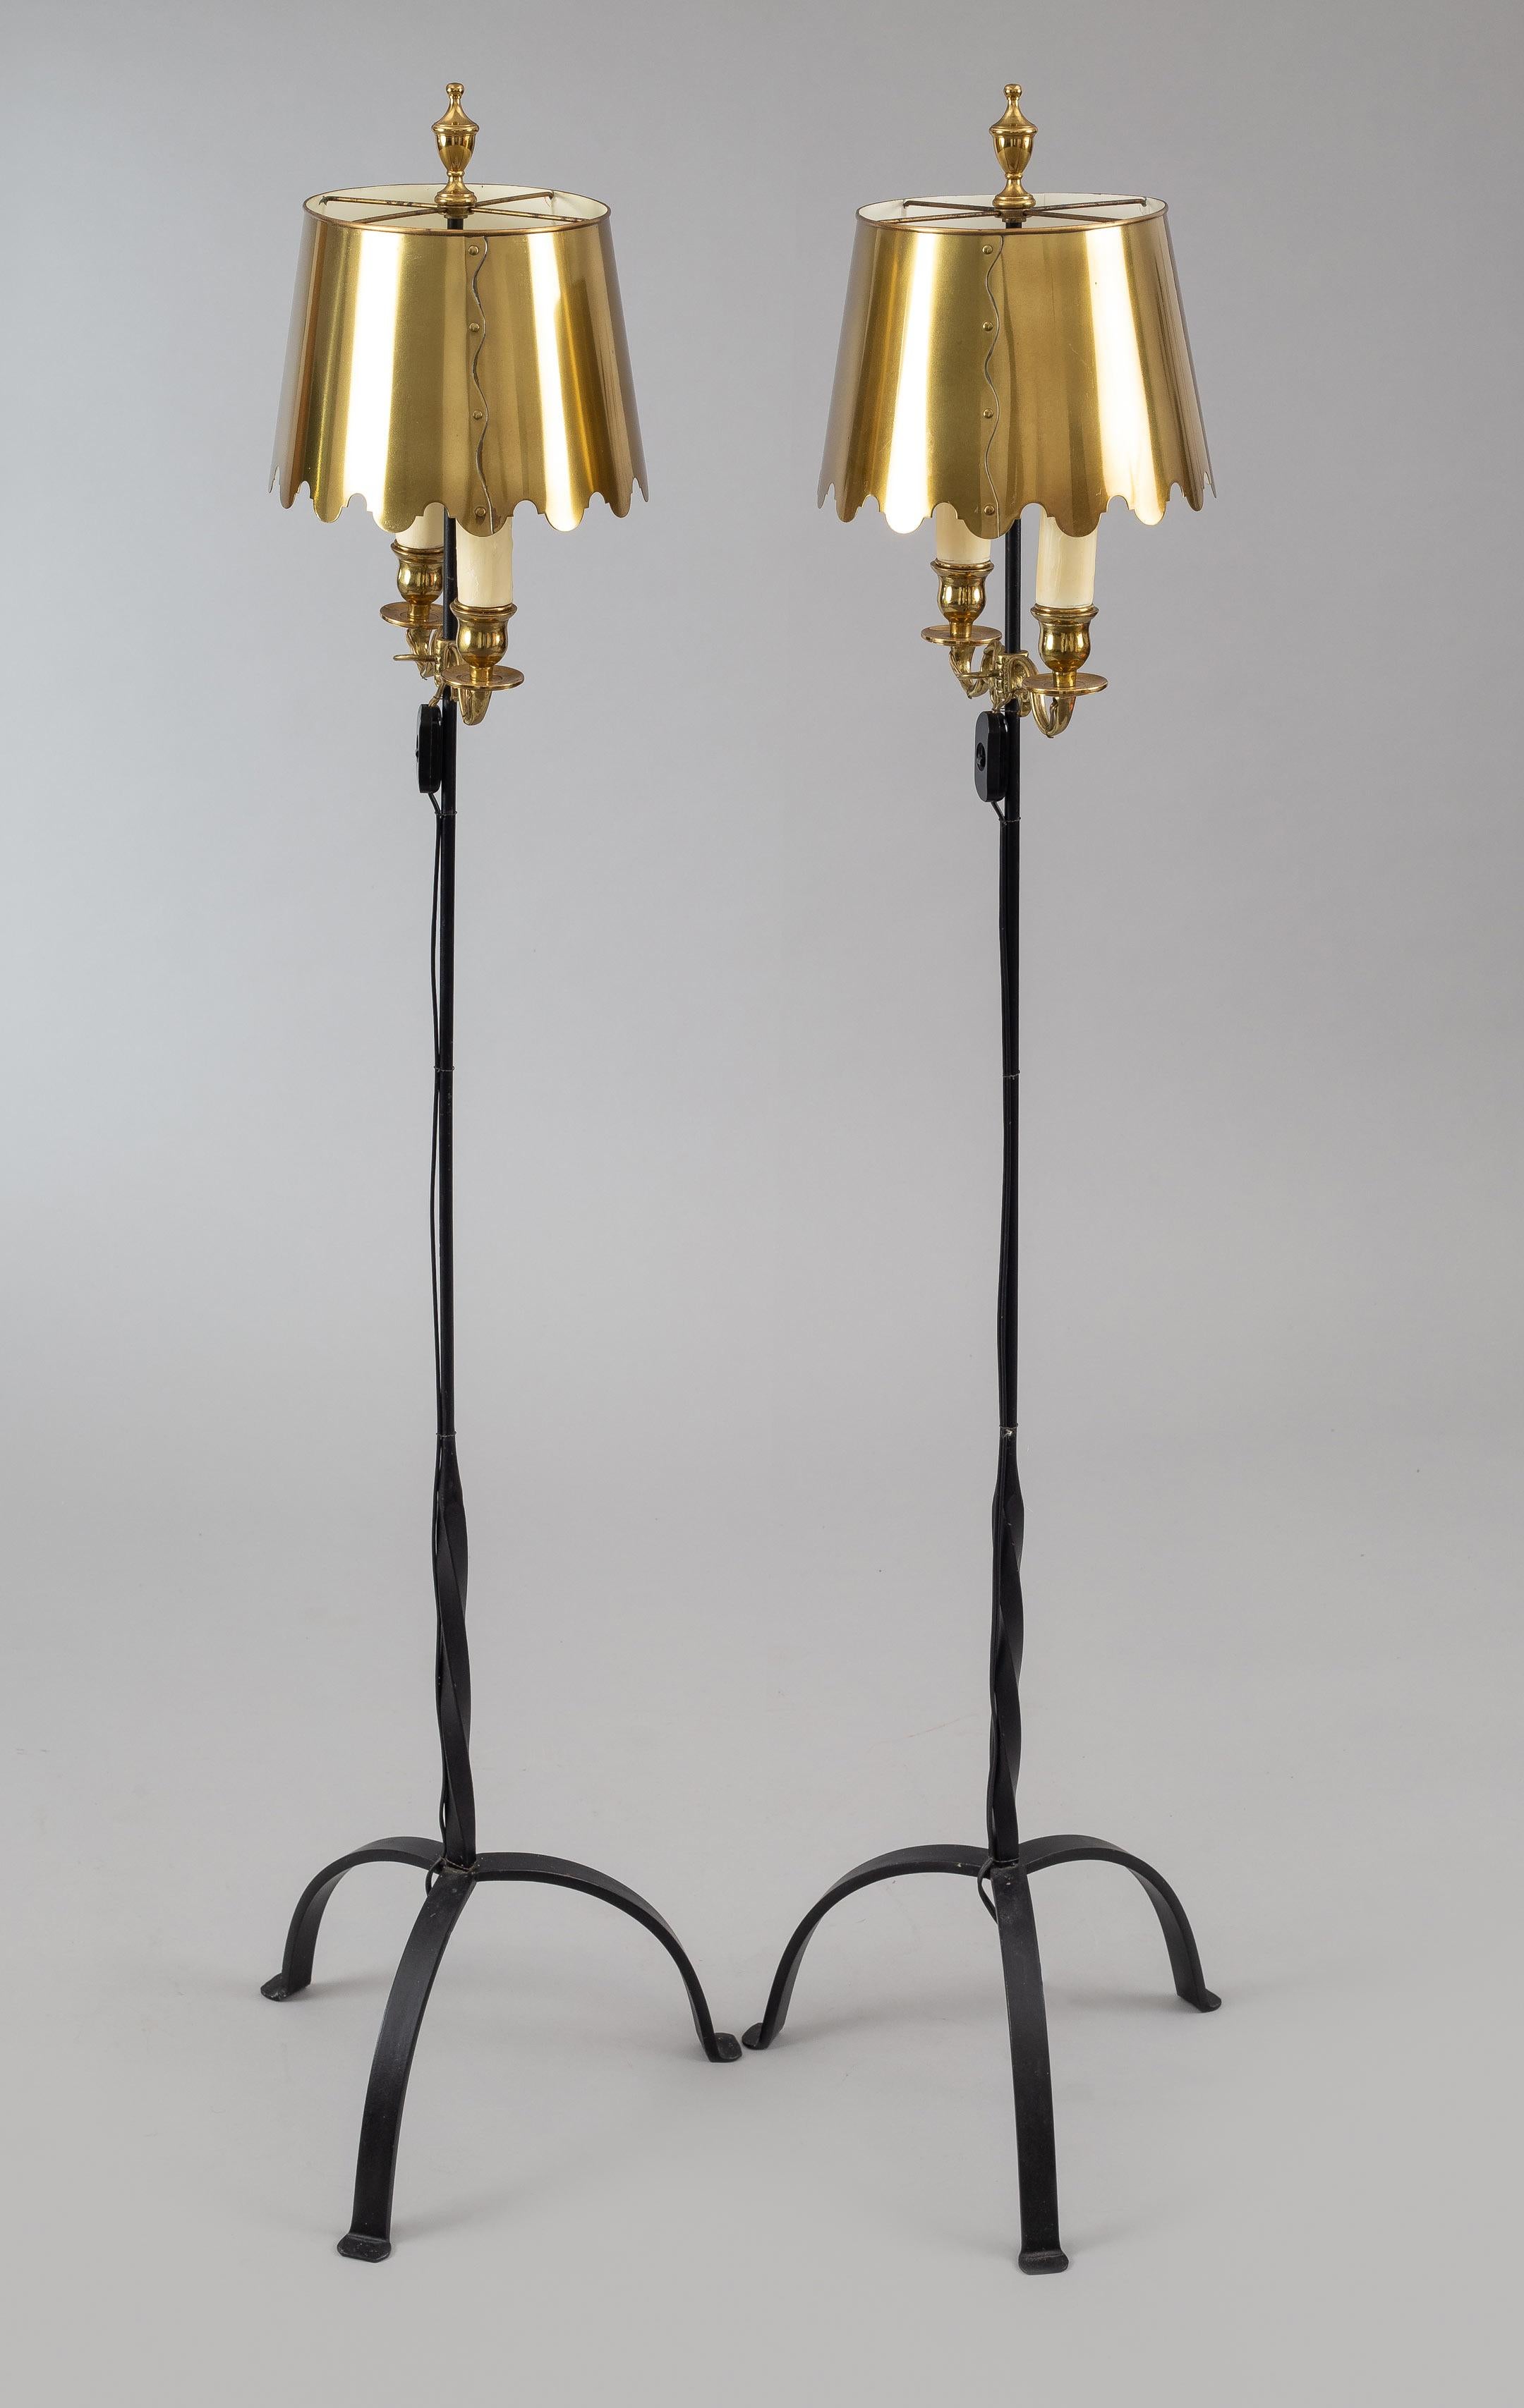 American Classical Vintage Pair of Fortuny Wrought Iron and Brass Floor Lamps